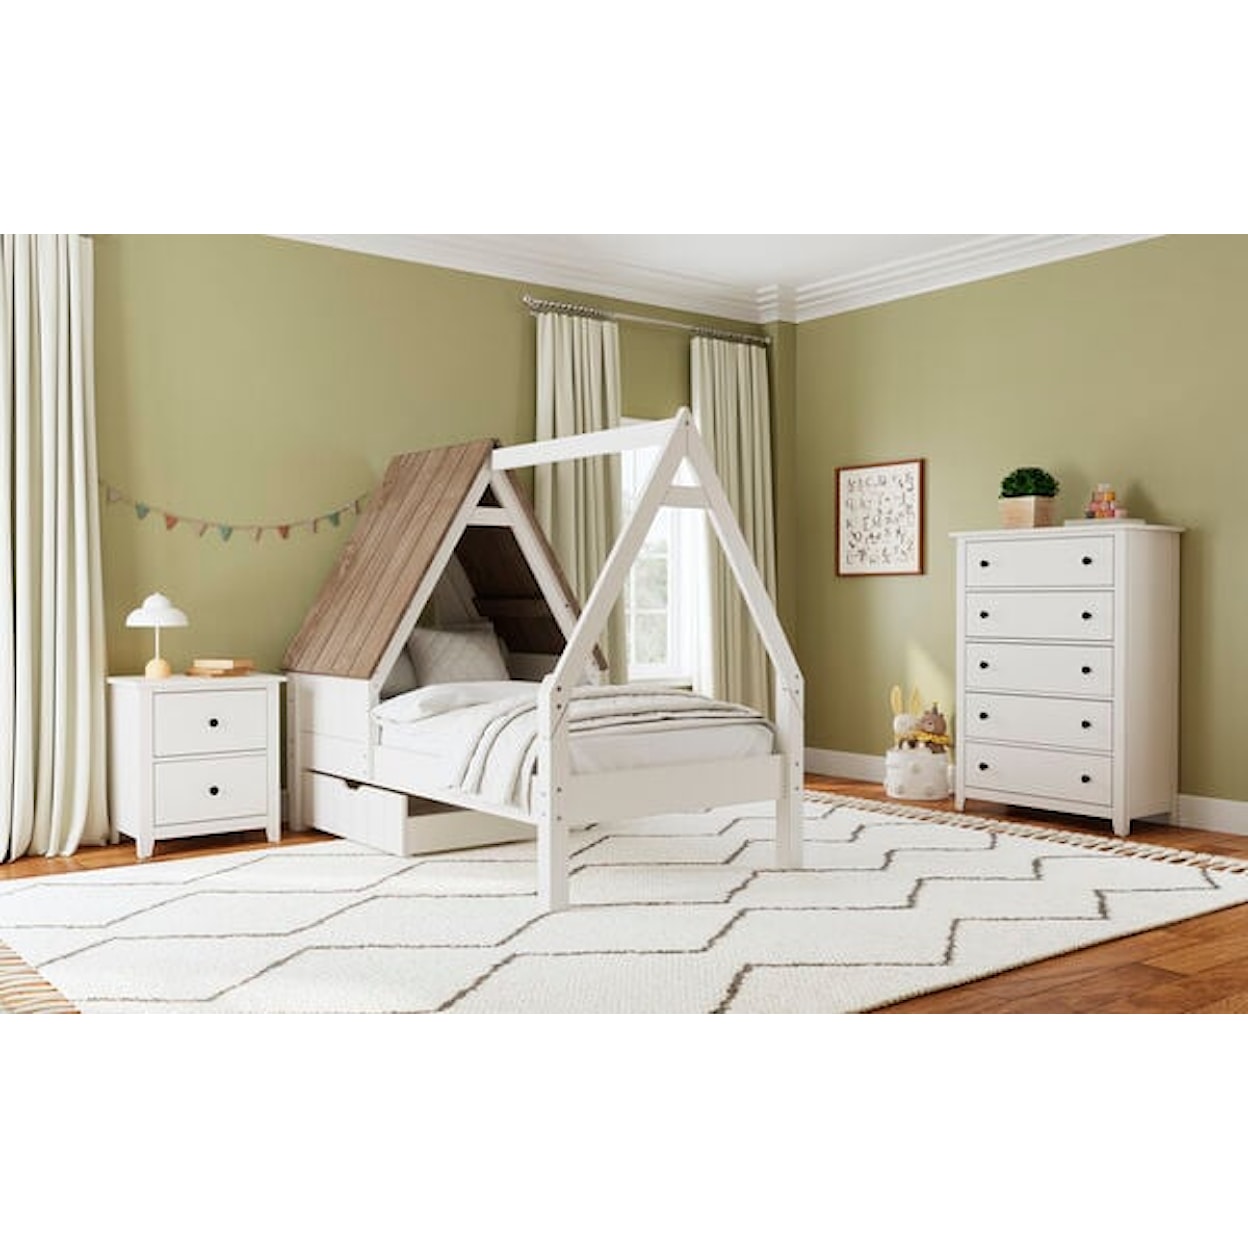 Westwood Design Lodge Series Twin Bed